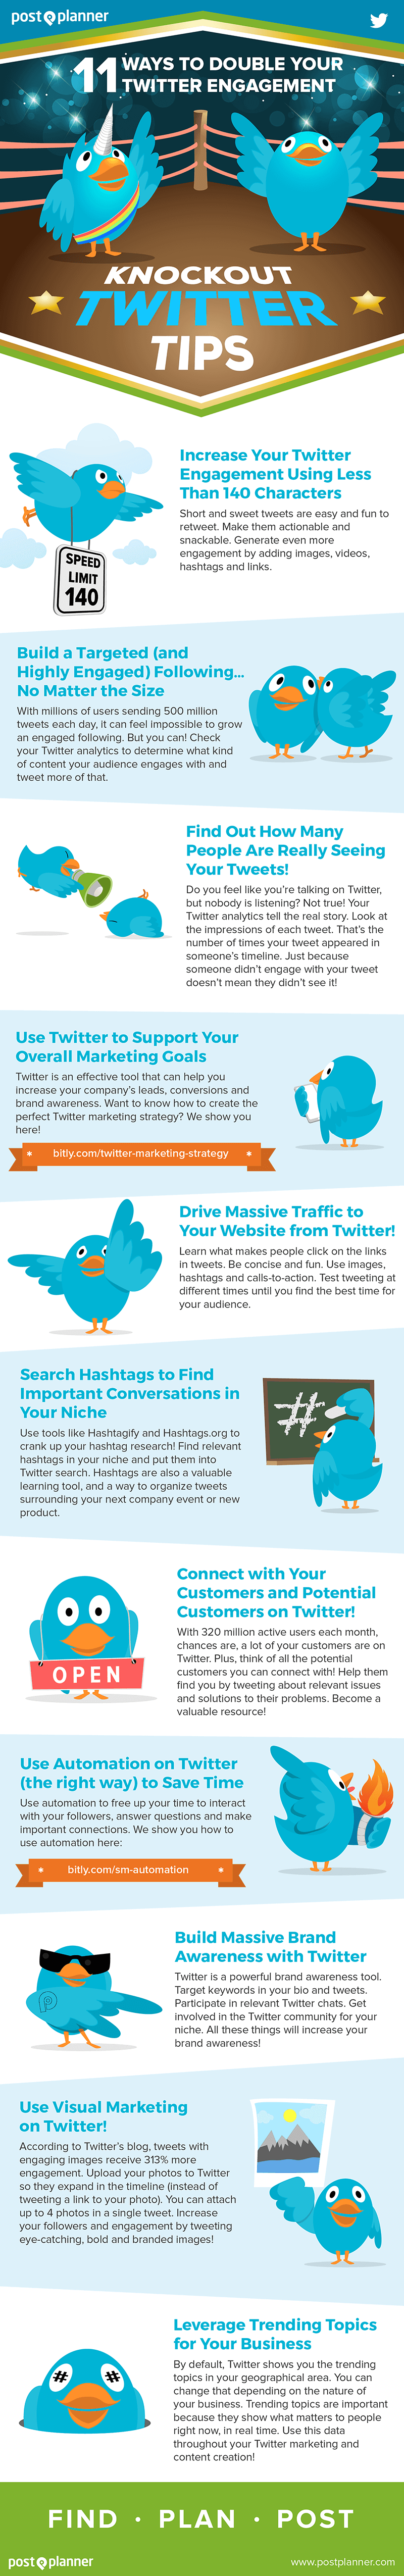 11 Ways To Double Your Twitter Engagement - #infographic